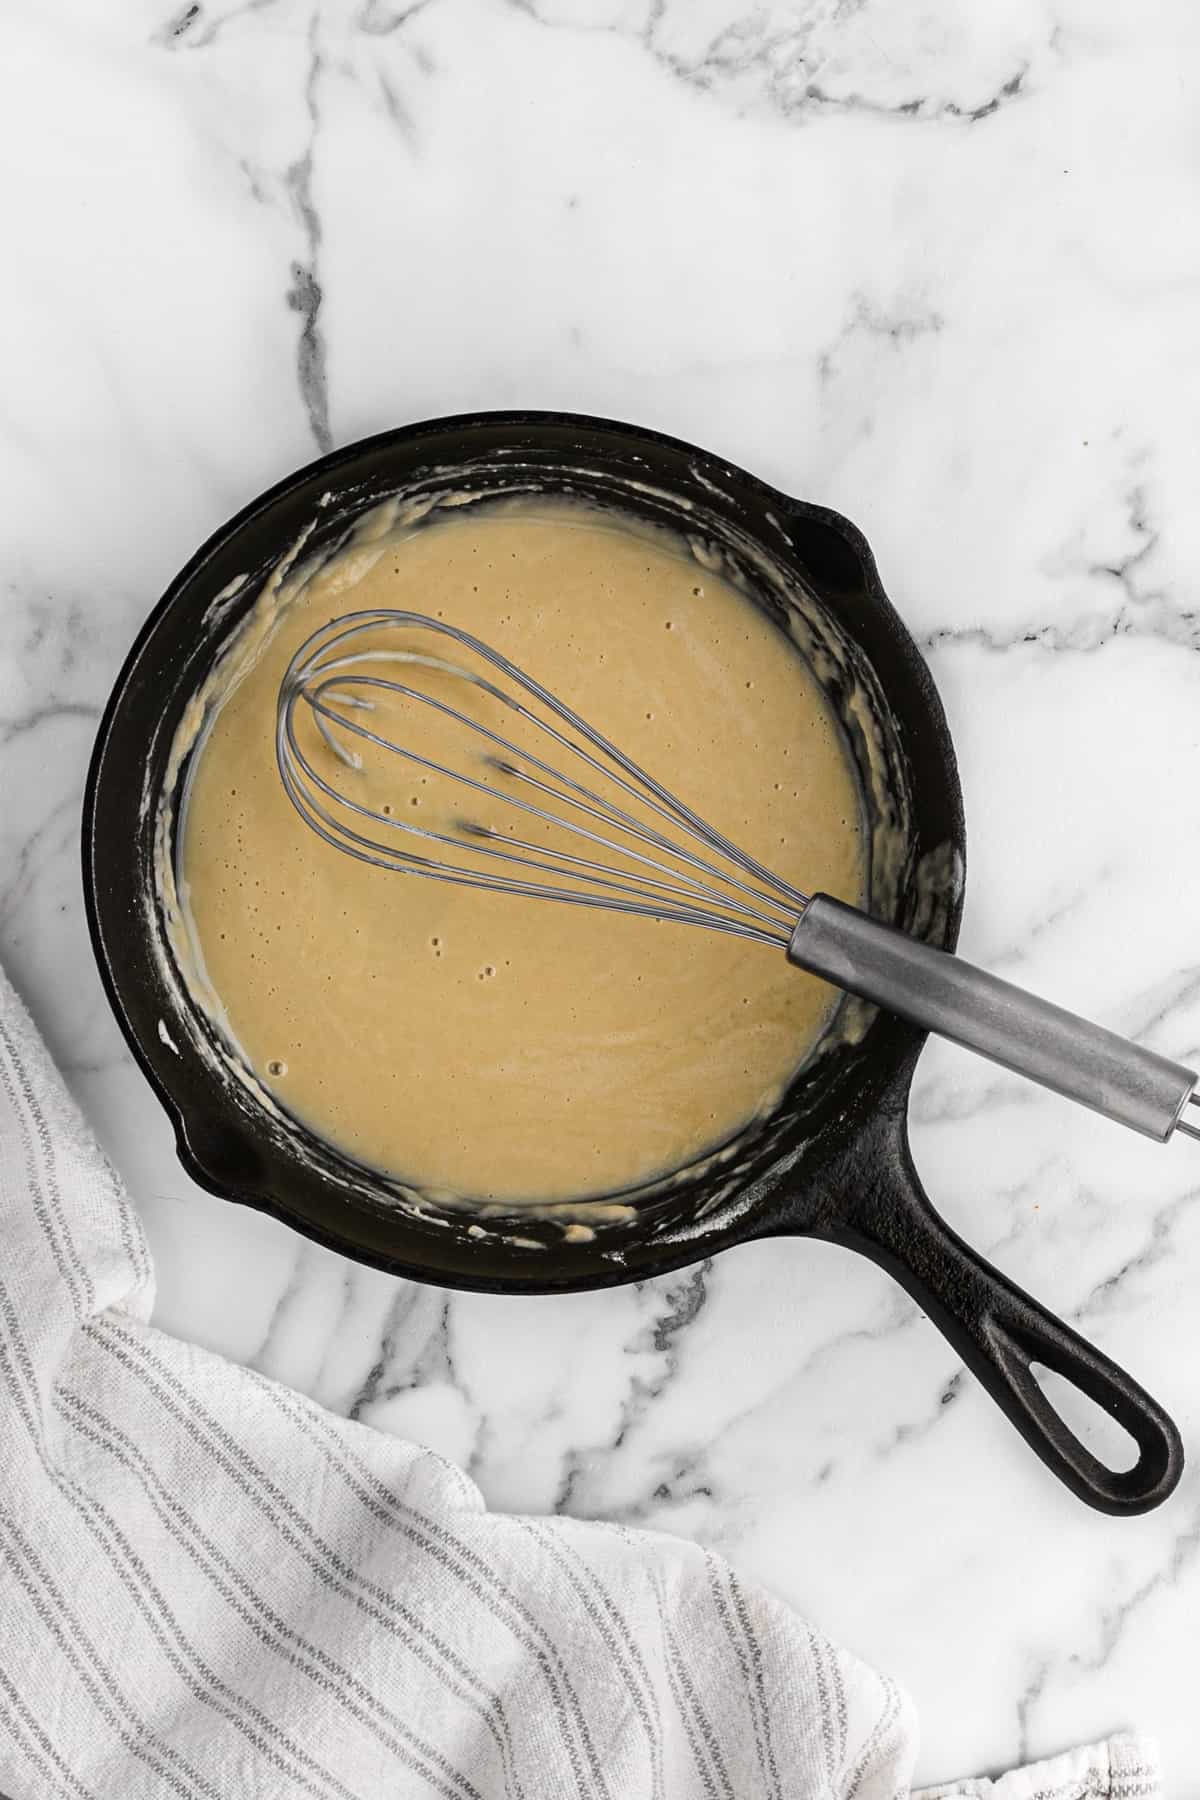 A whisk in a cast iron skillet of finished light sauce.